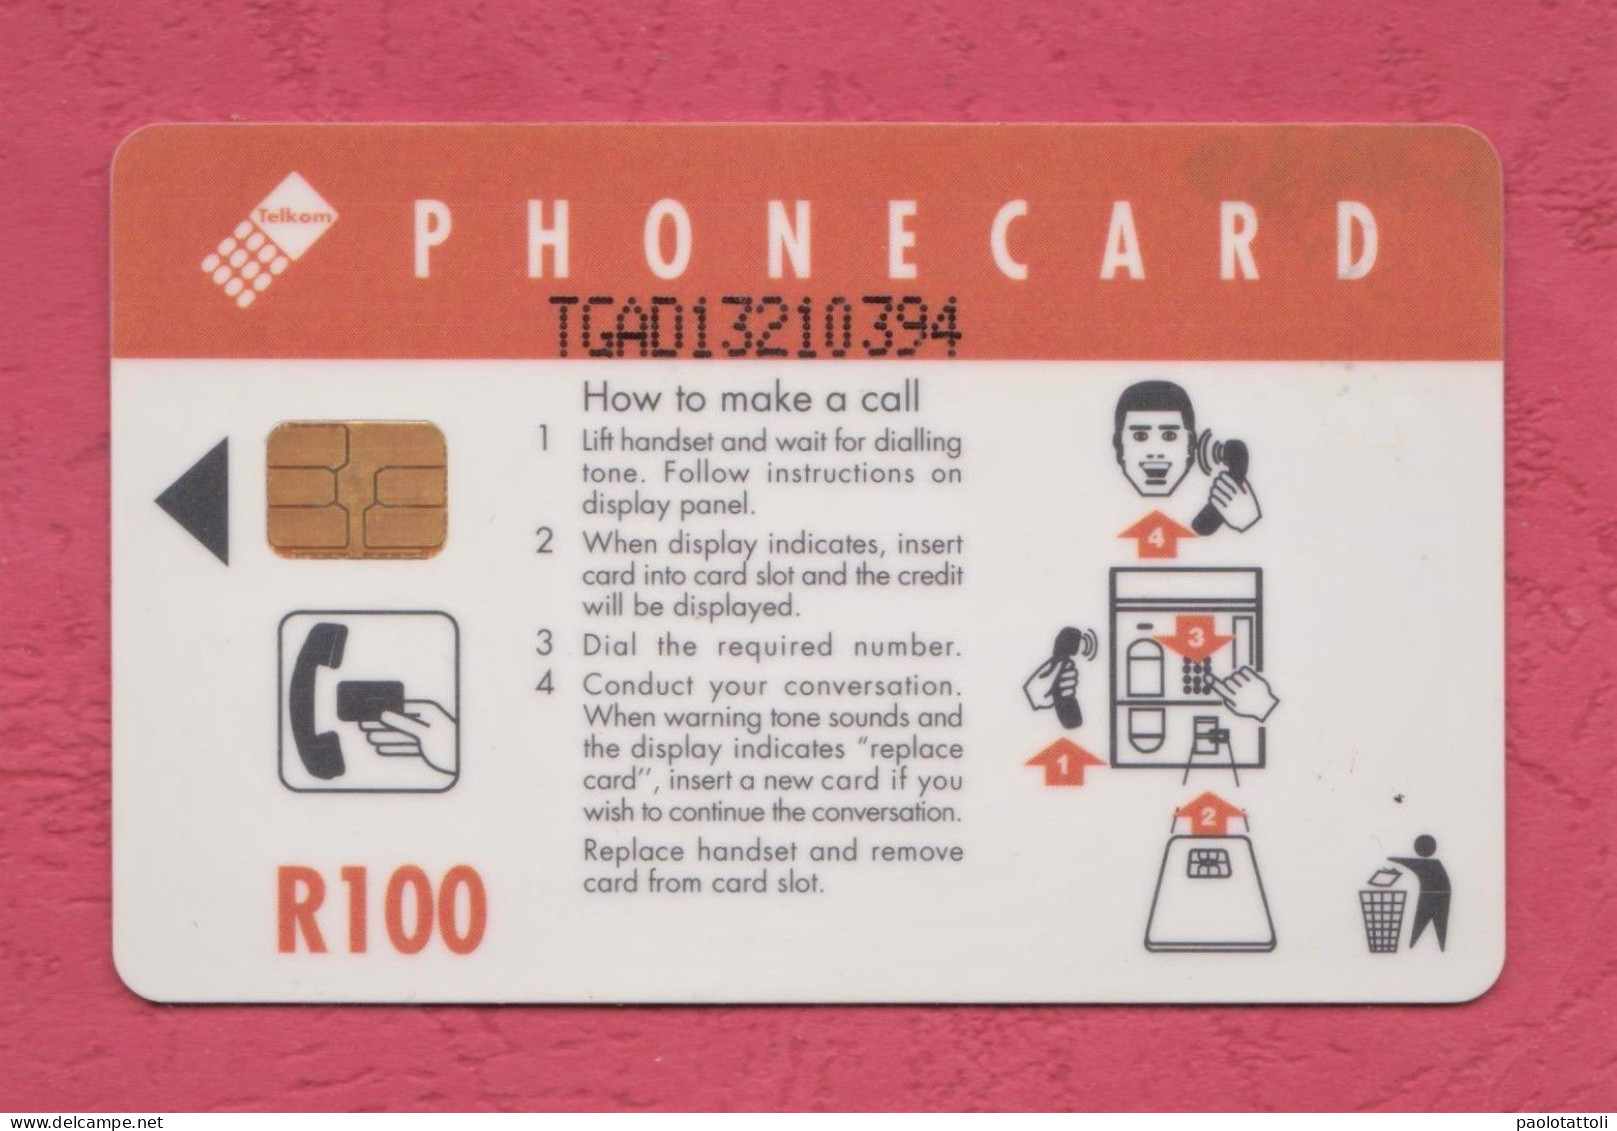 South Africa, Sud Africa- Used Phone Card With Chip By 50 & 100ands, Telkom. The Card That Gets You Talking. - Südafrika